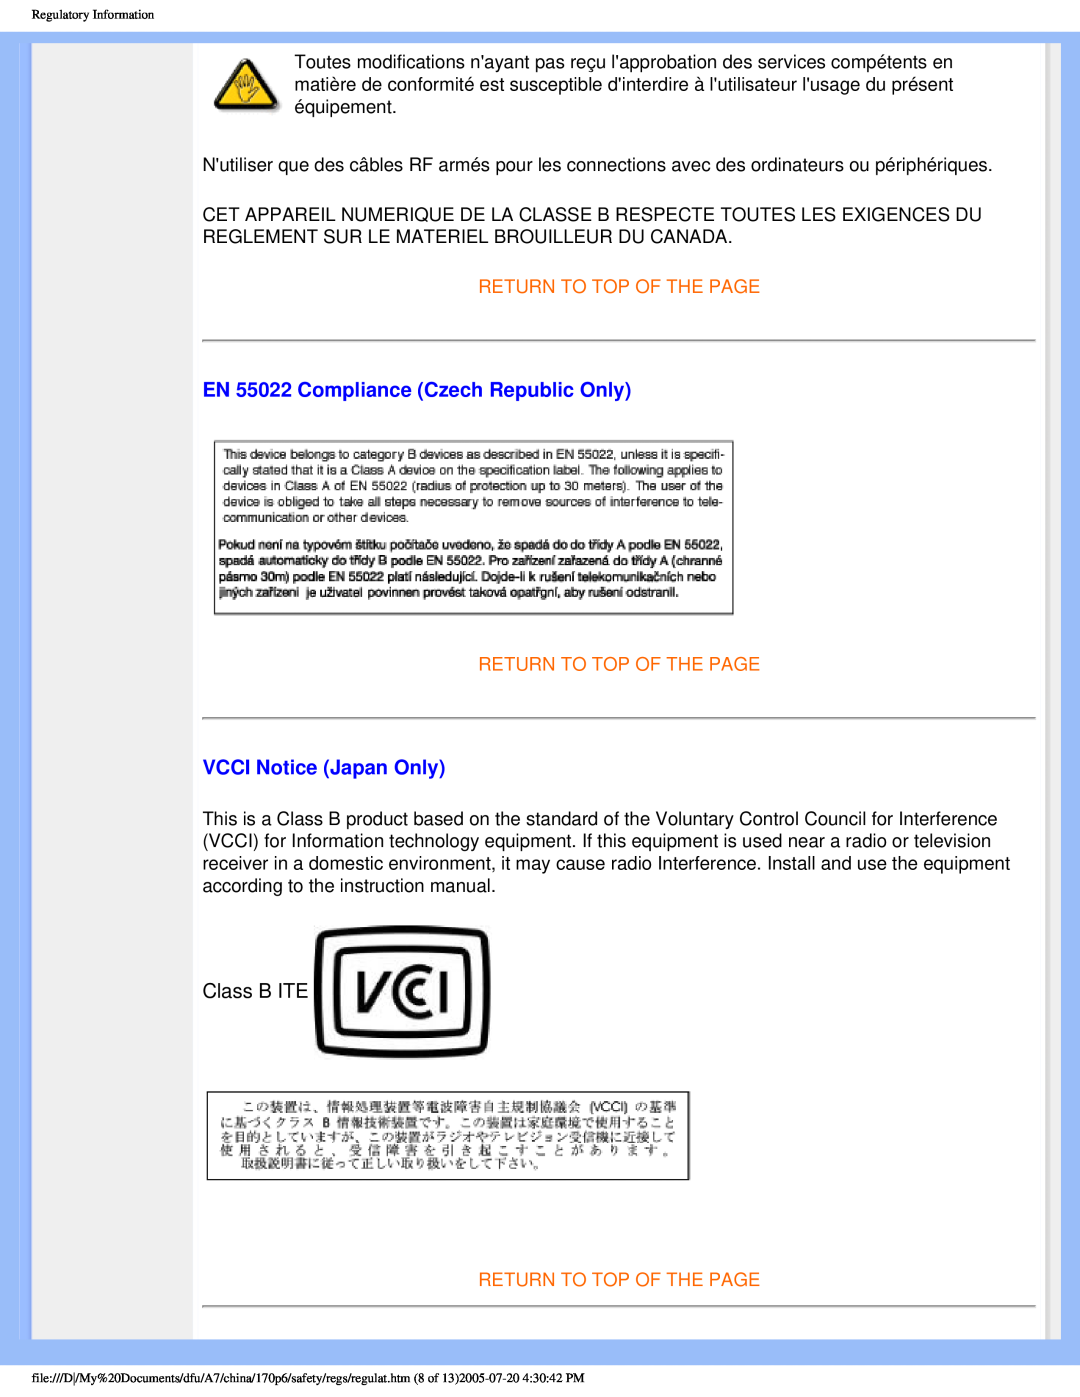 Philips R6RY0 user manual EN 55022 Compliance Czech Republic Only, VCCI Notice Japan Only, Return To Top Of The Page 